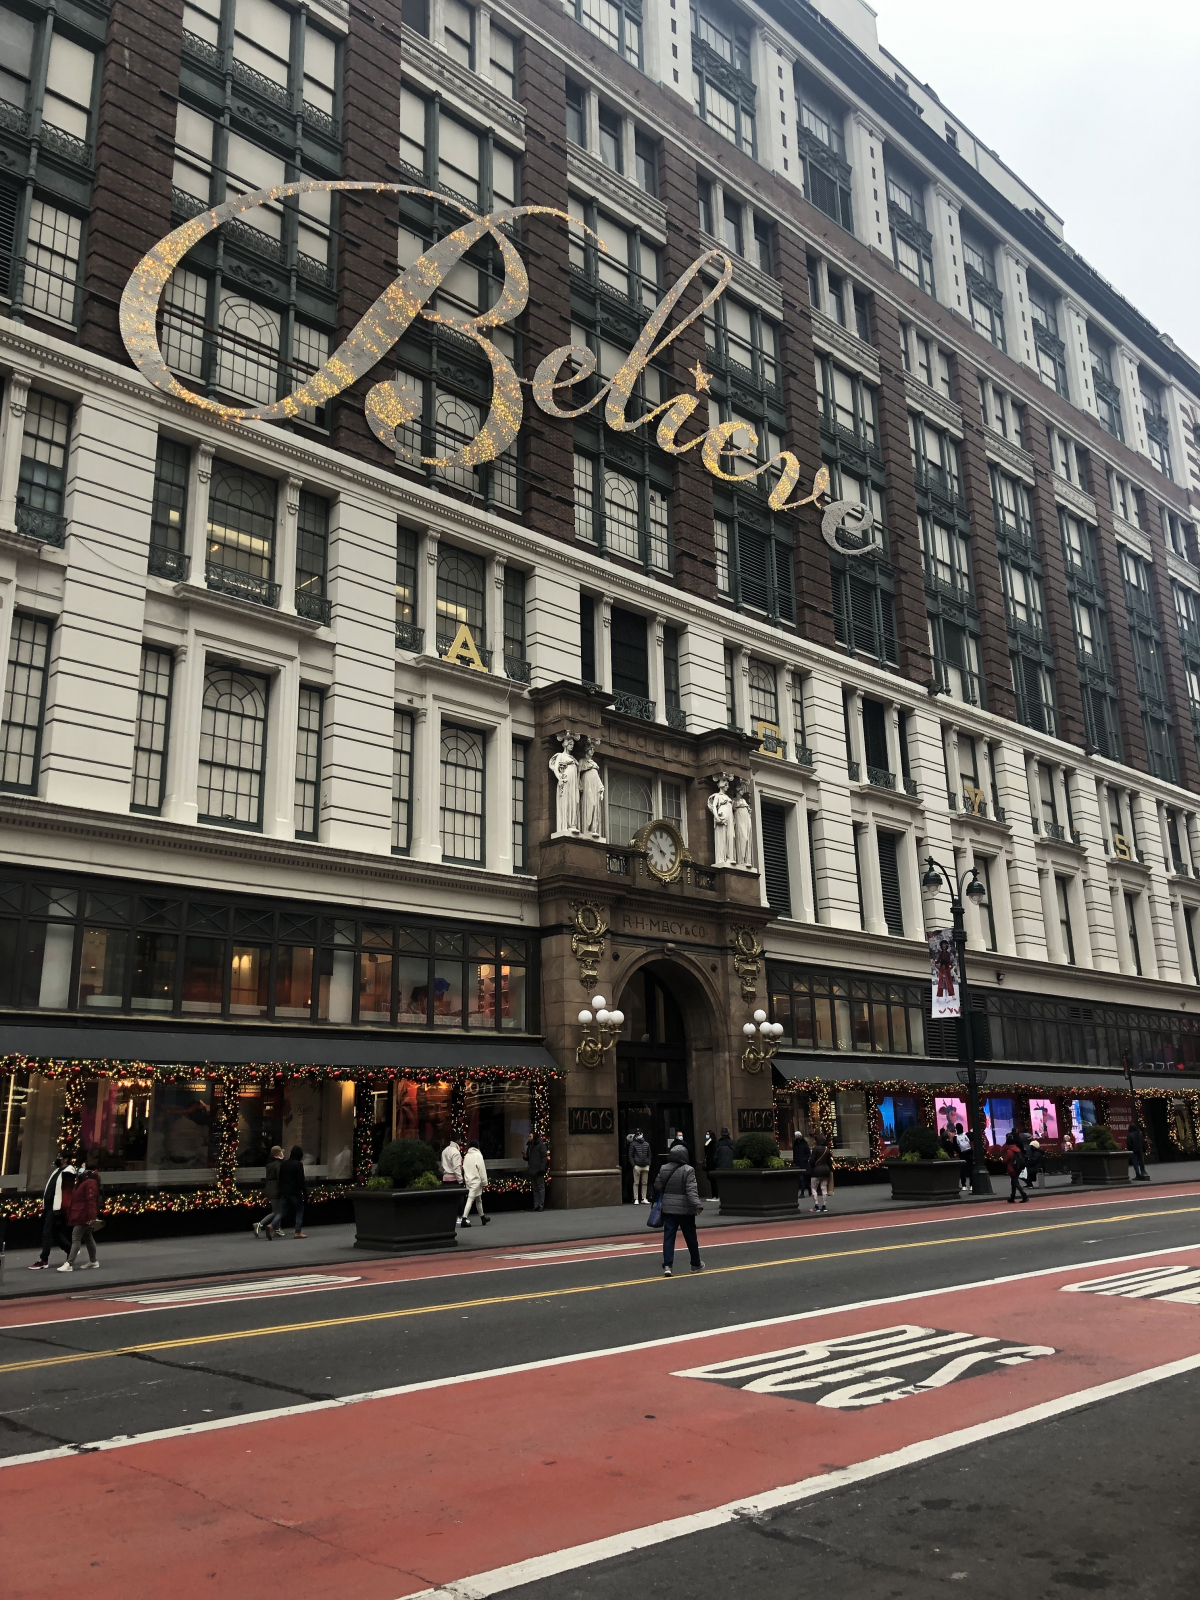 &#039;Believe&#039; lit up on the side of Macy&#039;s on 34th Street in New York City.